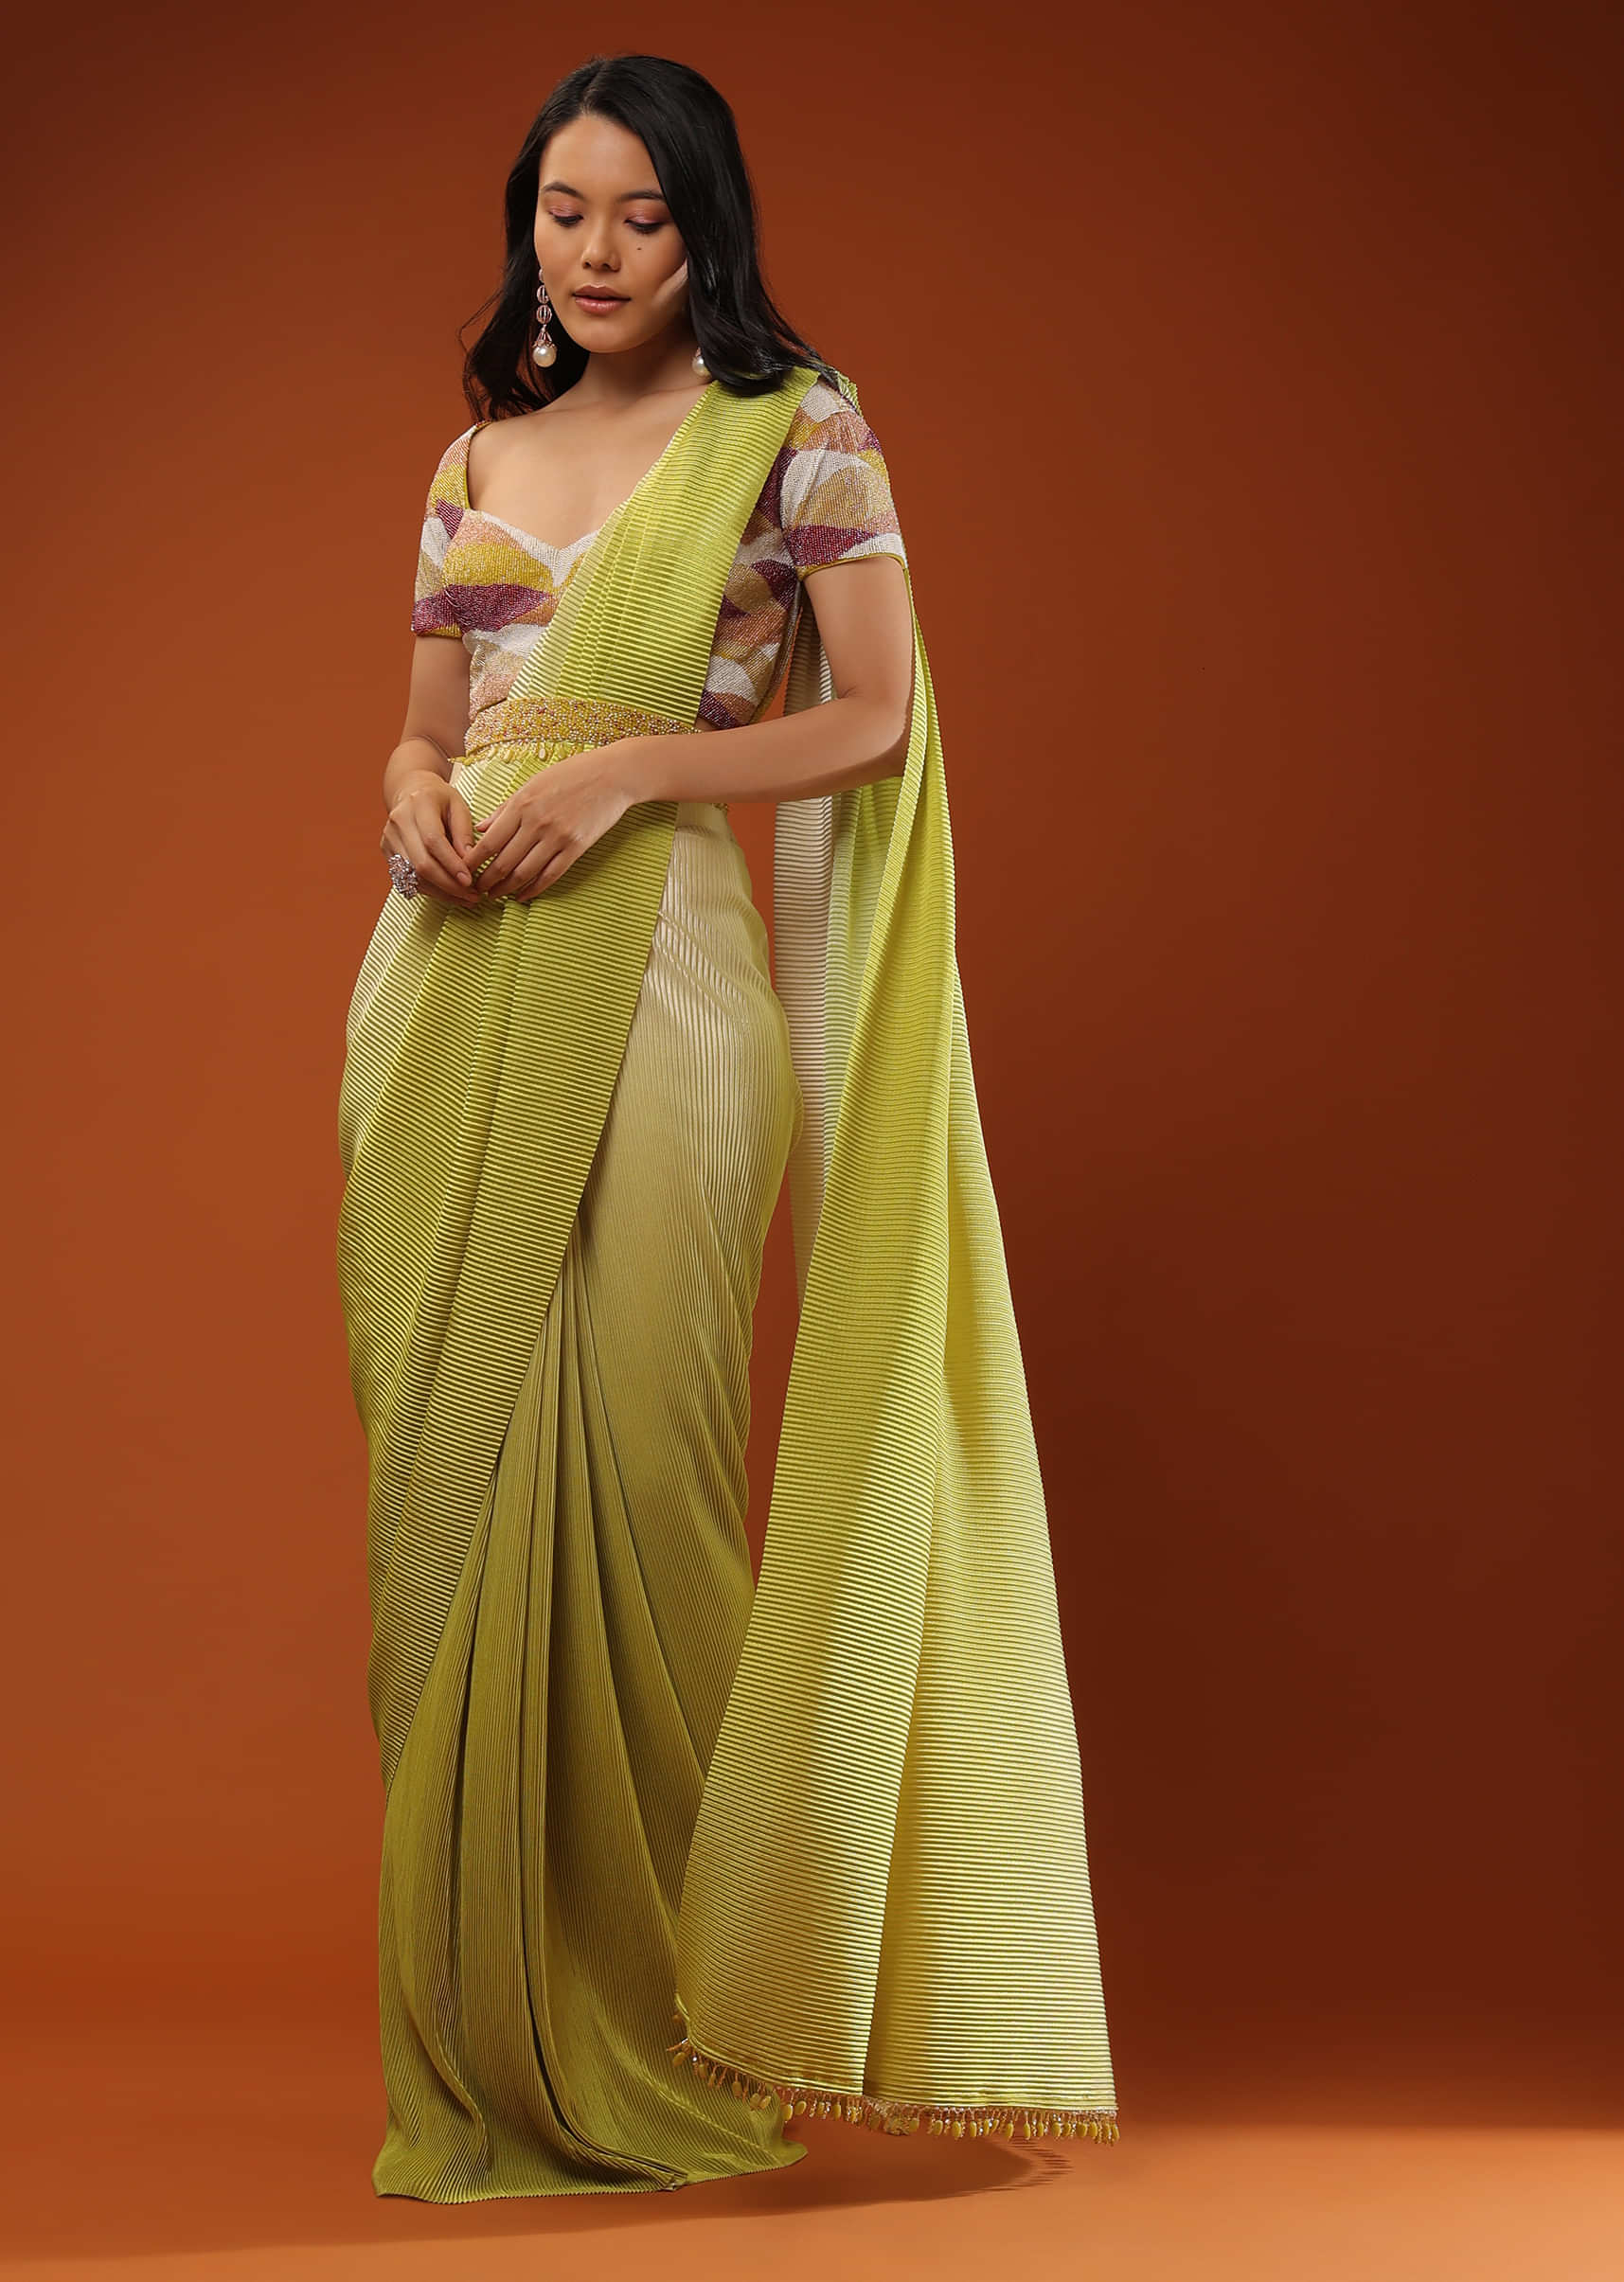 Lemon Green Ombre Saree With A Crop Top In Moti Embroidery, Crop Top Comes In Half Sleeves And Sweet Heart Neckline